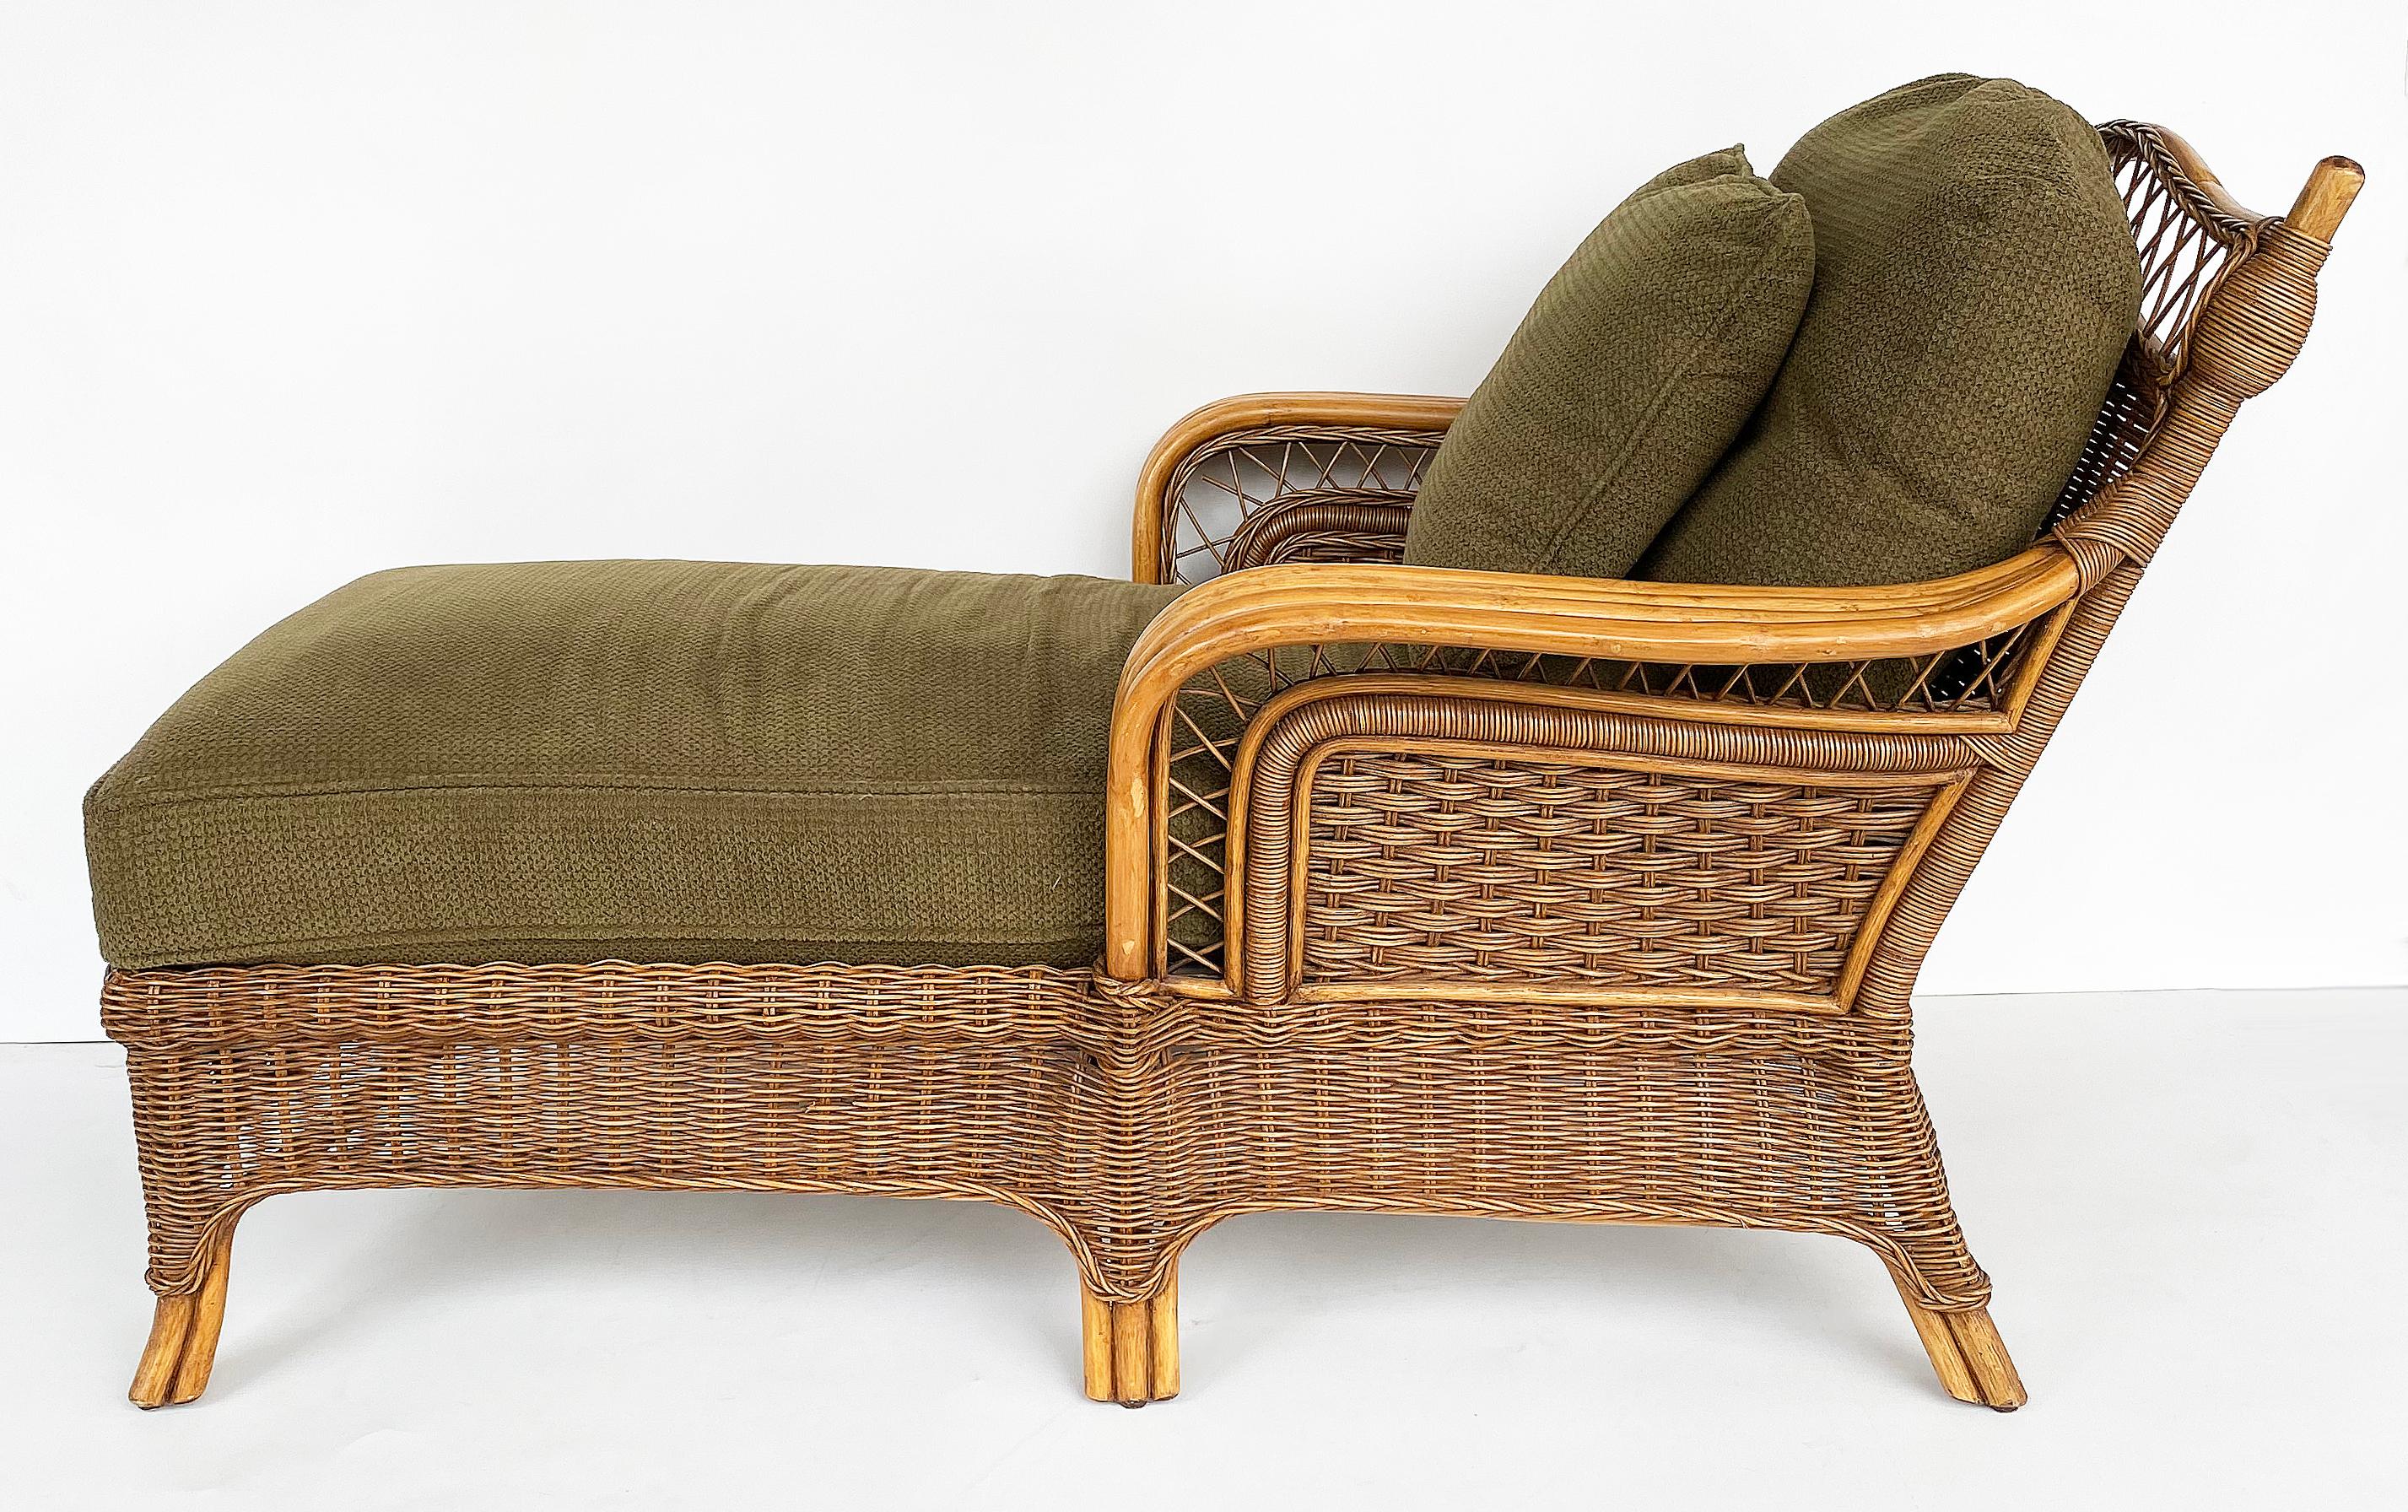 Rattan chaise lounge with upholstered seat by Braxton Culler, USA

Offered for sale is a 2008 woven rattan chaise lounge with an ample-sized full-length seat cushion and back cushion. The chaise is beautifully made and will offer a lovely place to